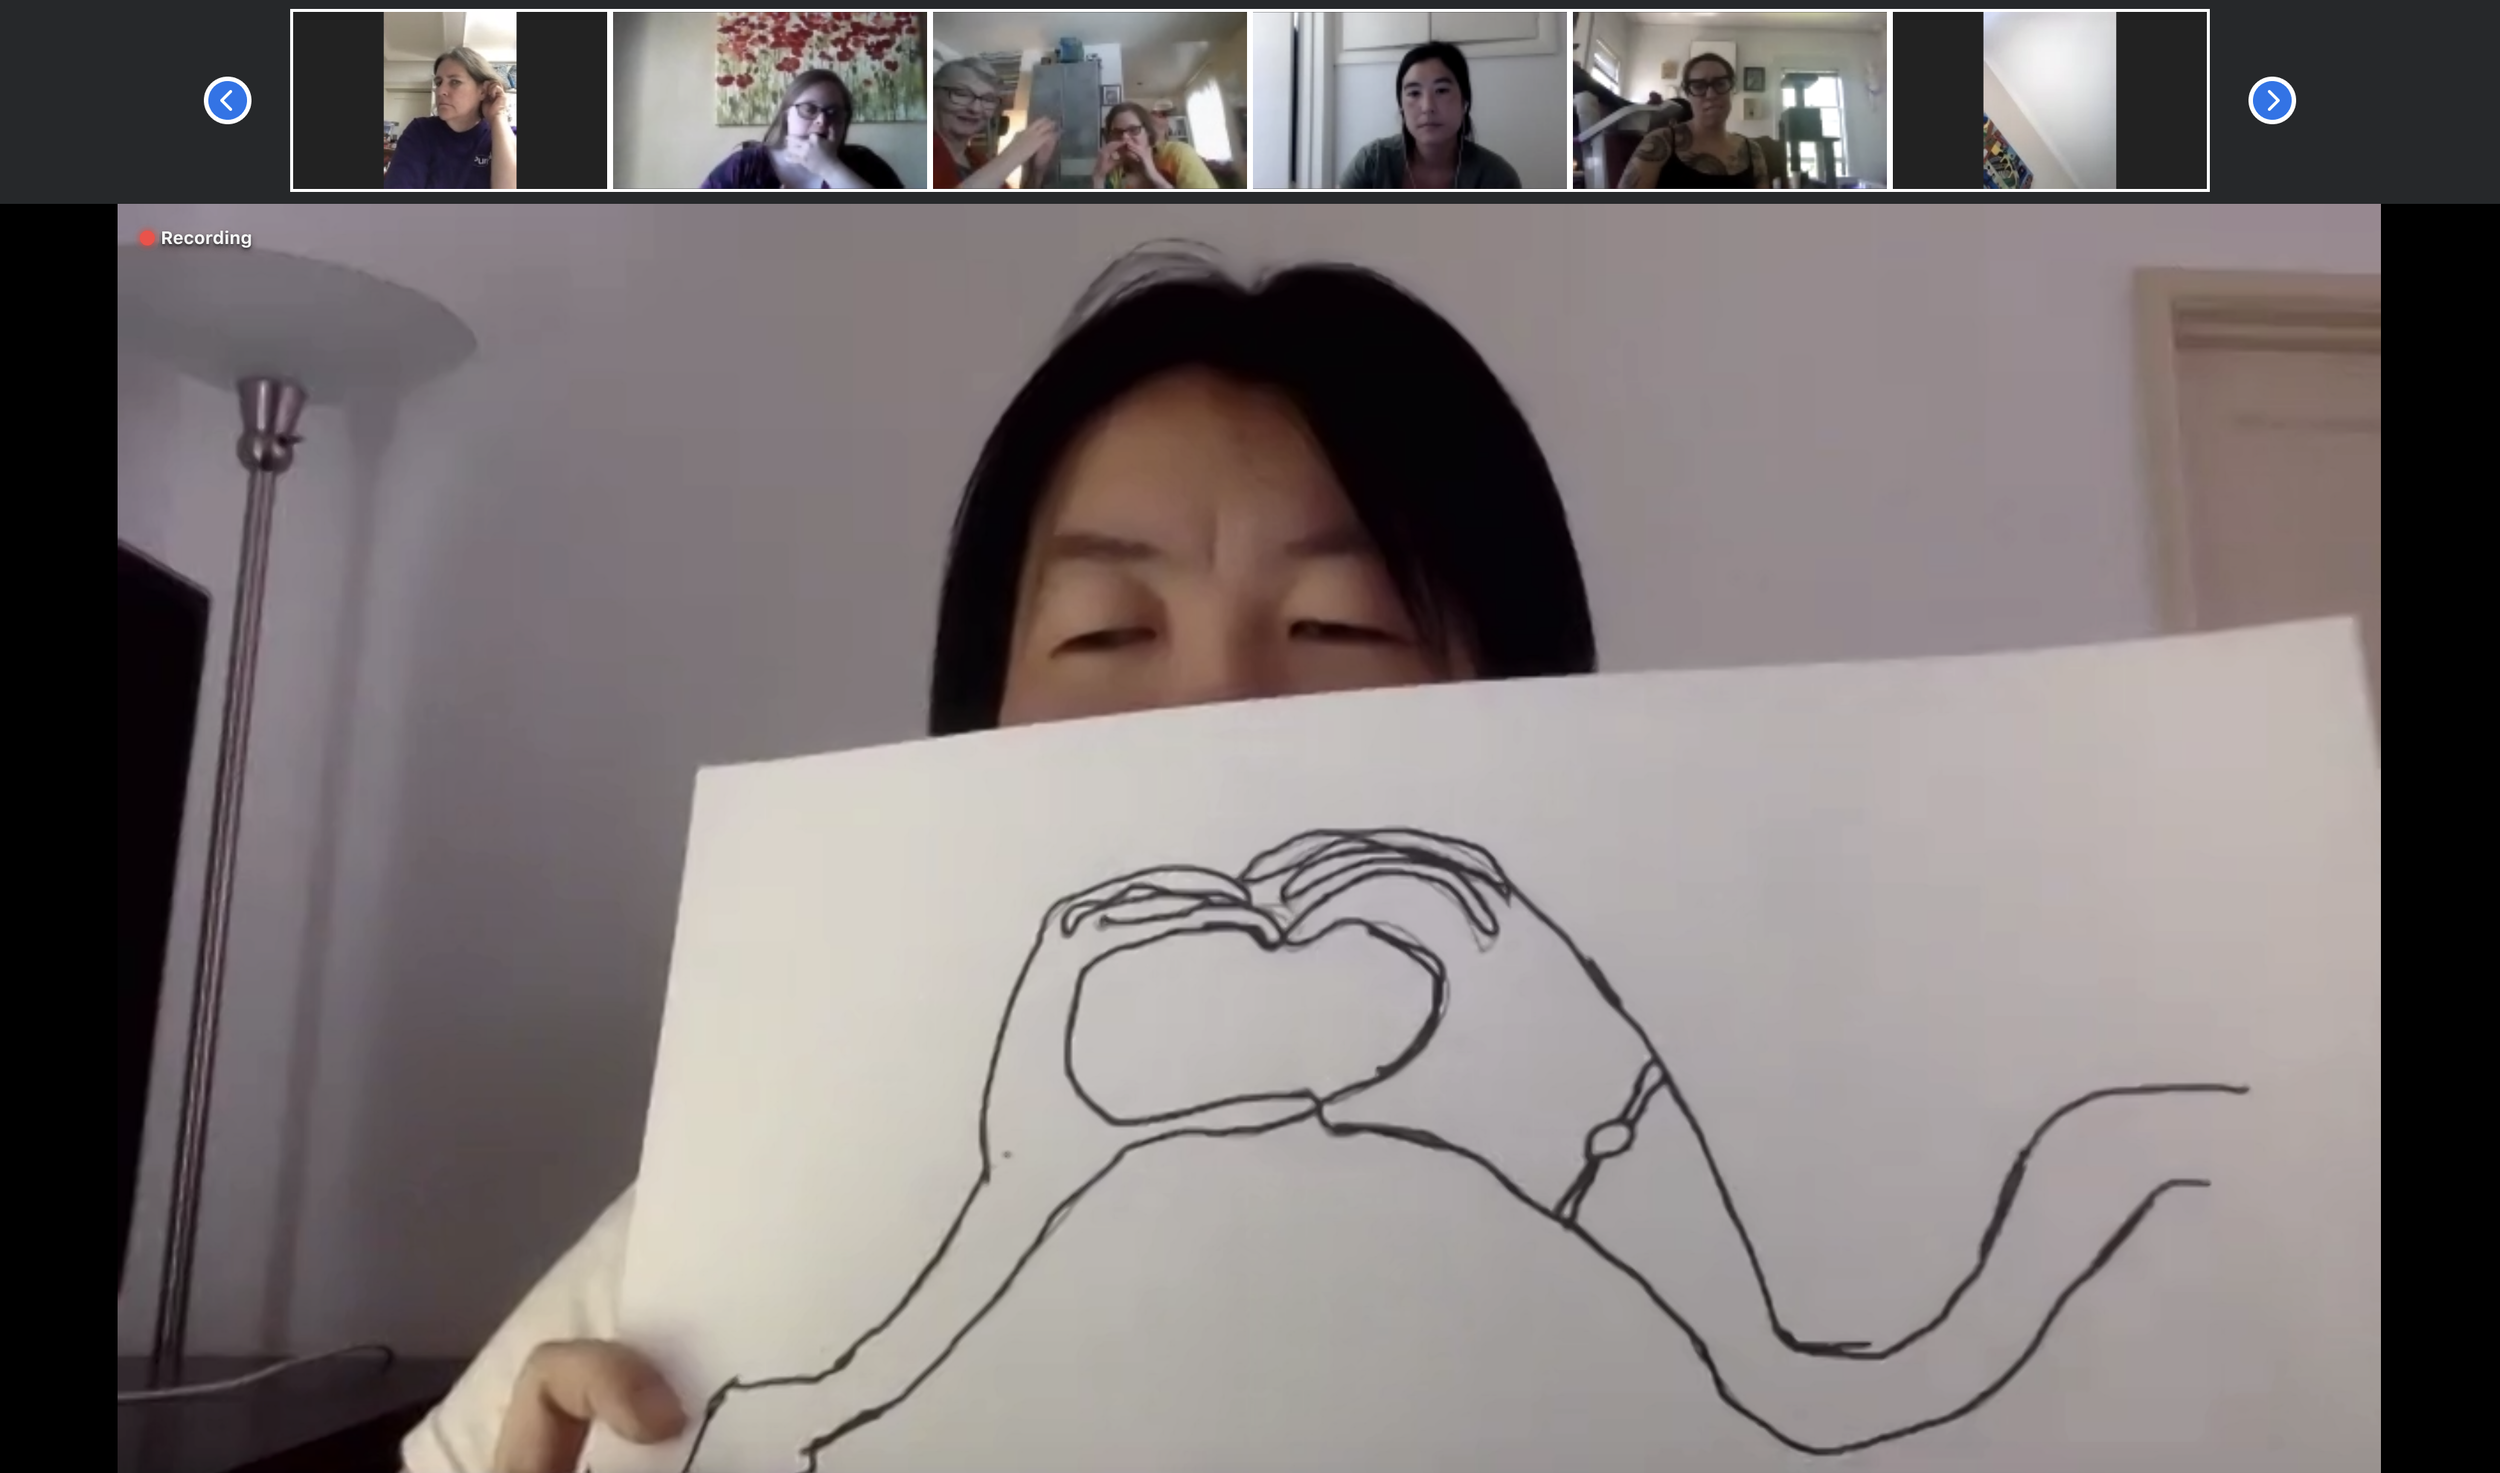 Artist Diana Lo showing a work in progress during an online program on "Vision Boards"